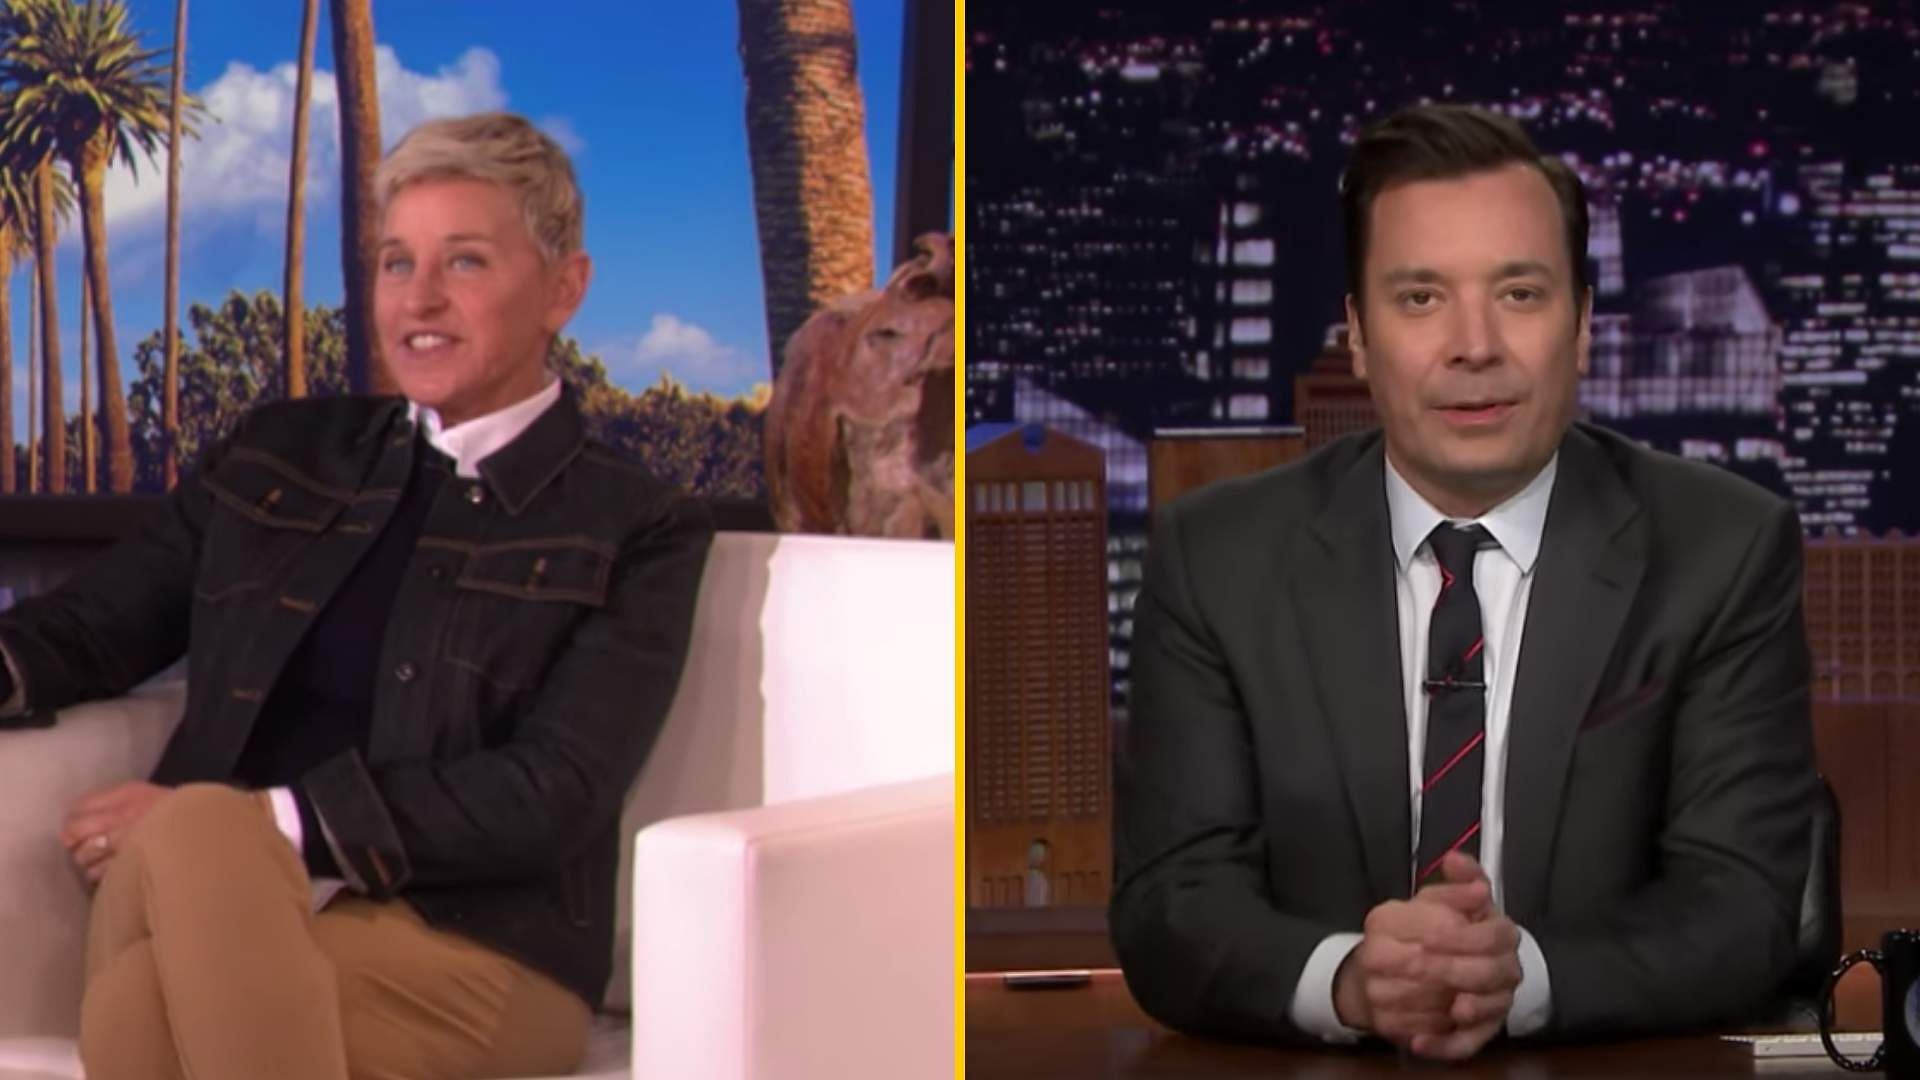 <i>The Ellen DeGeneres Show </i>and The Tonight Show Starring Jimmy Fallon will not tape in front of a live audience amidst coronavirus fears.